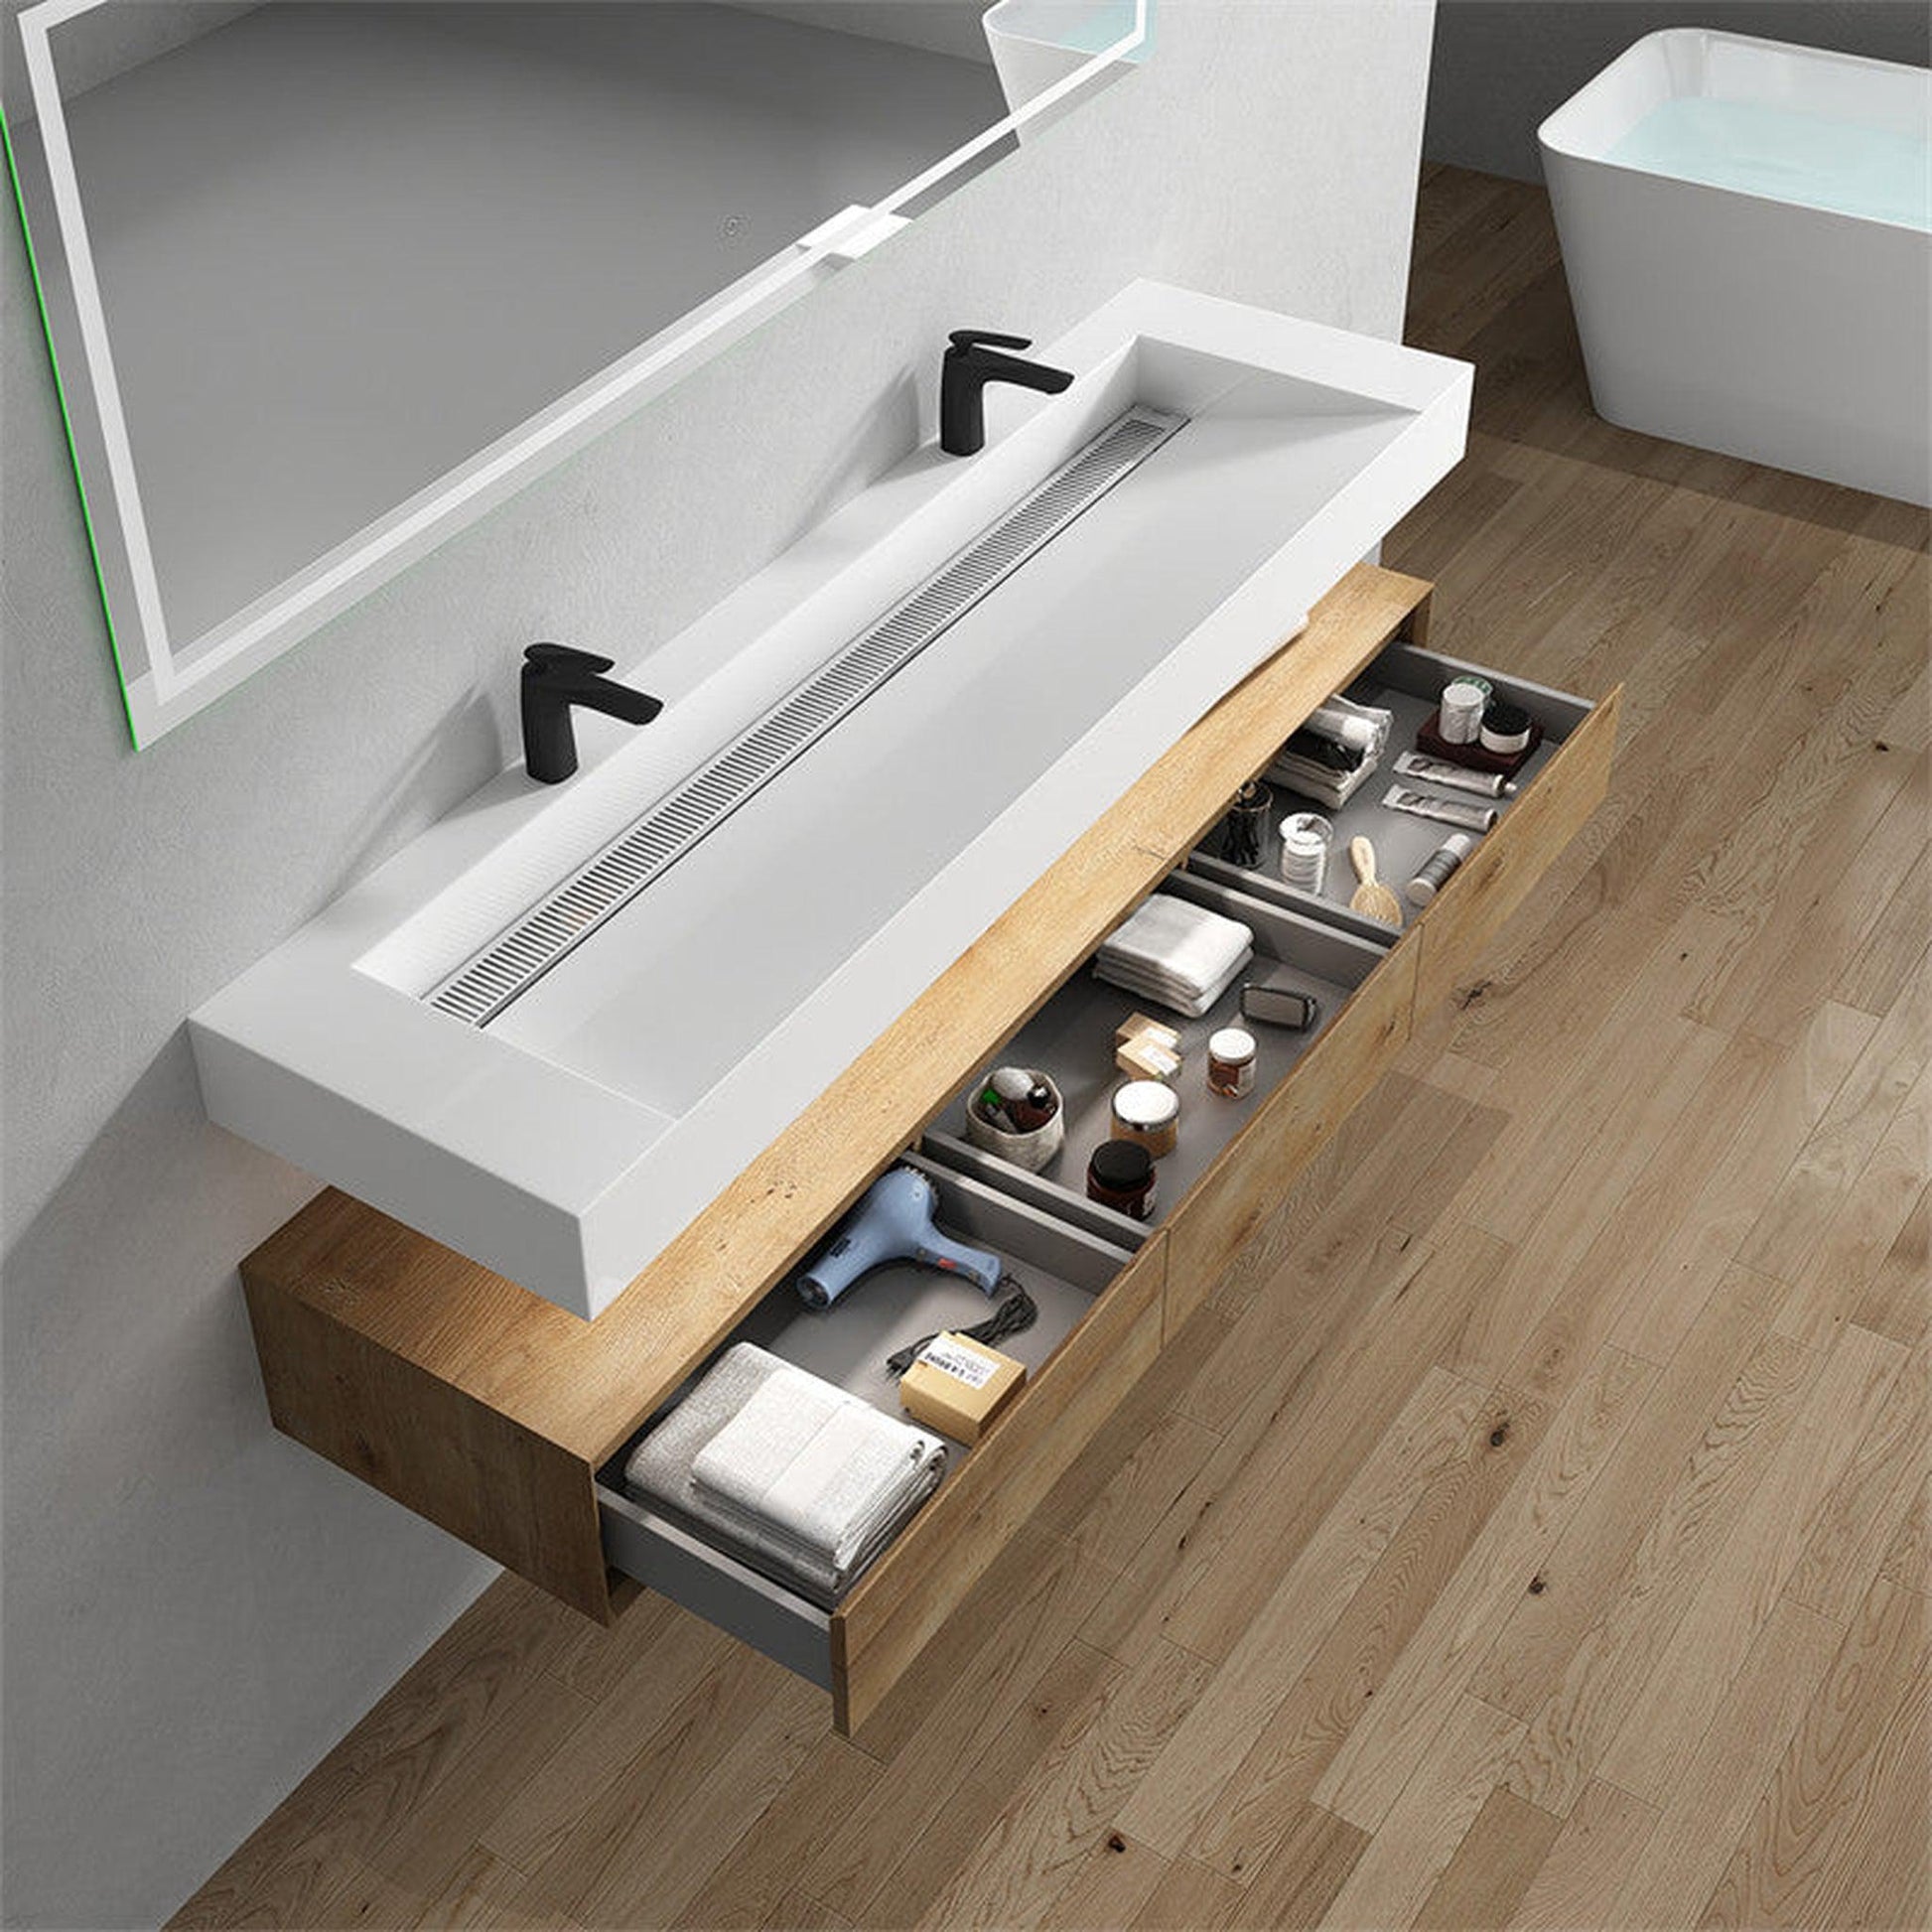 Moreno Bath ALYSA 72" White Oak Floating Vanity With Double Faucet Holes and Reinforced White Acrylic Sink